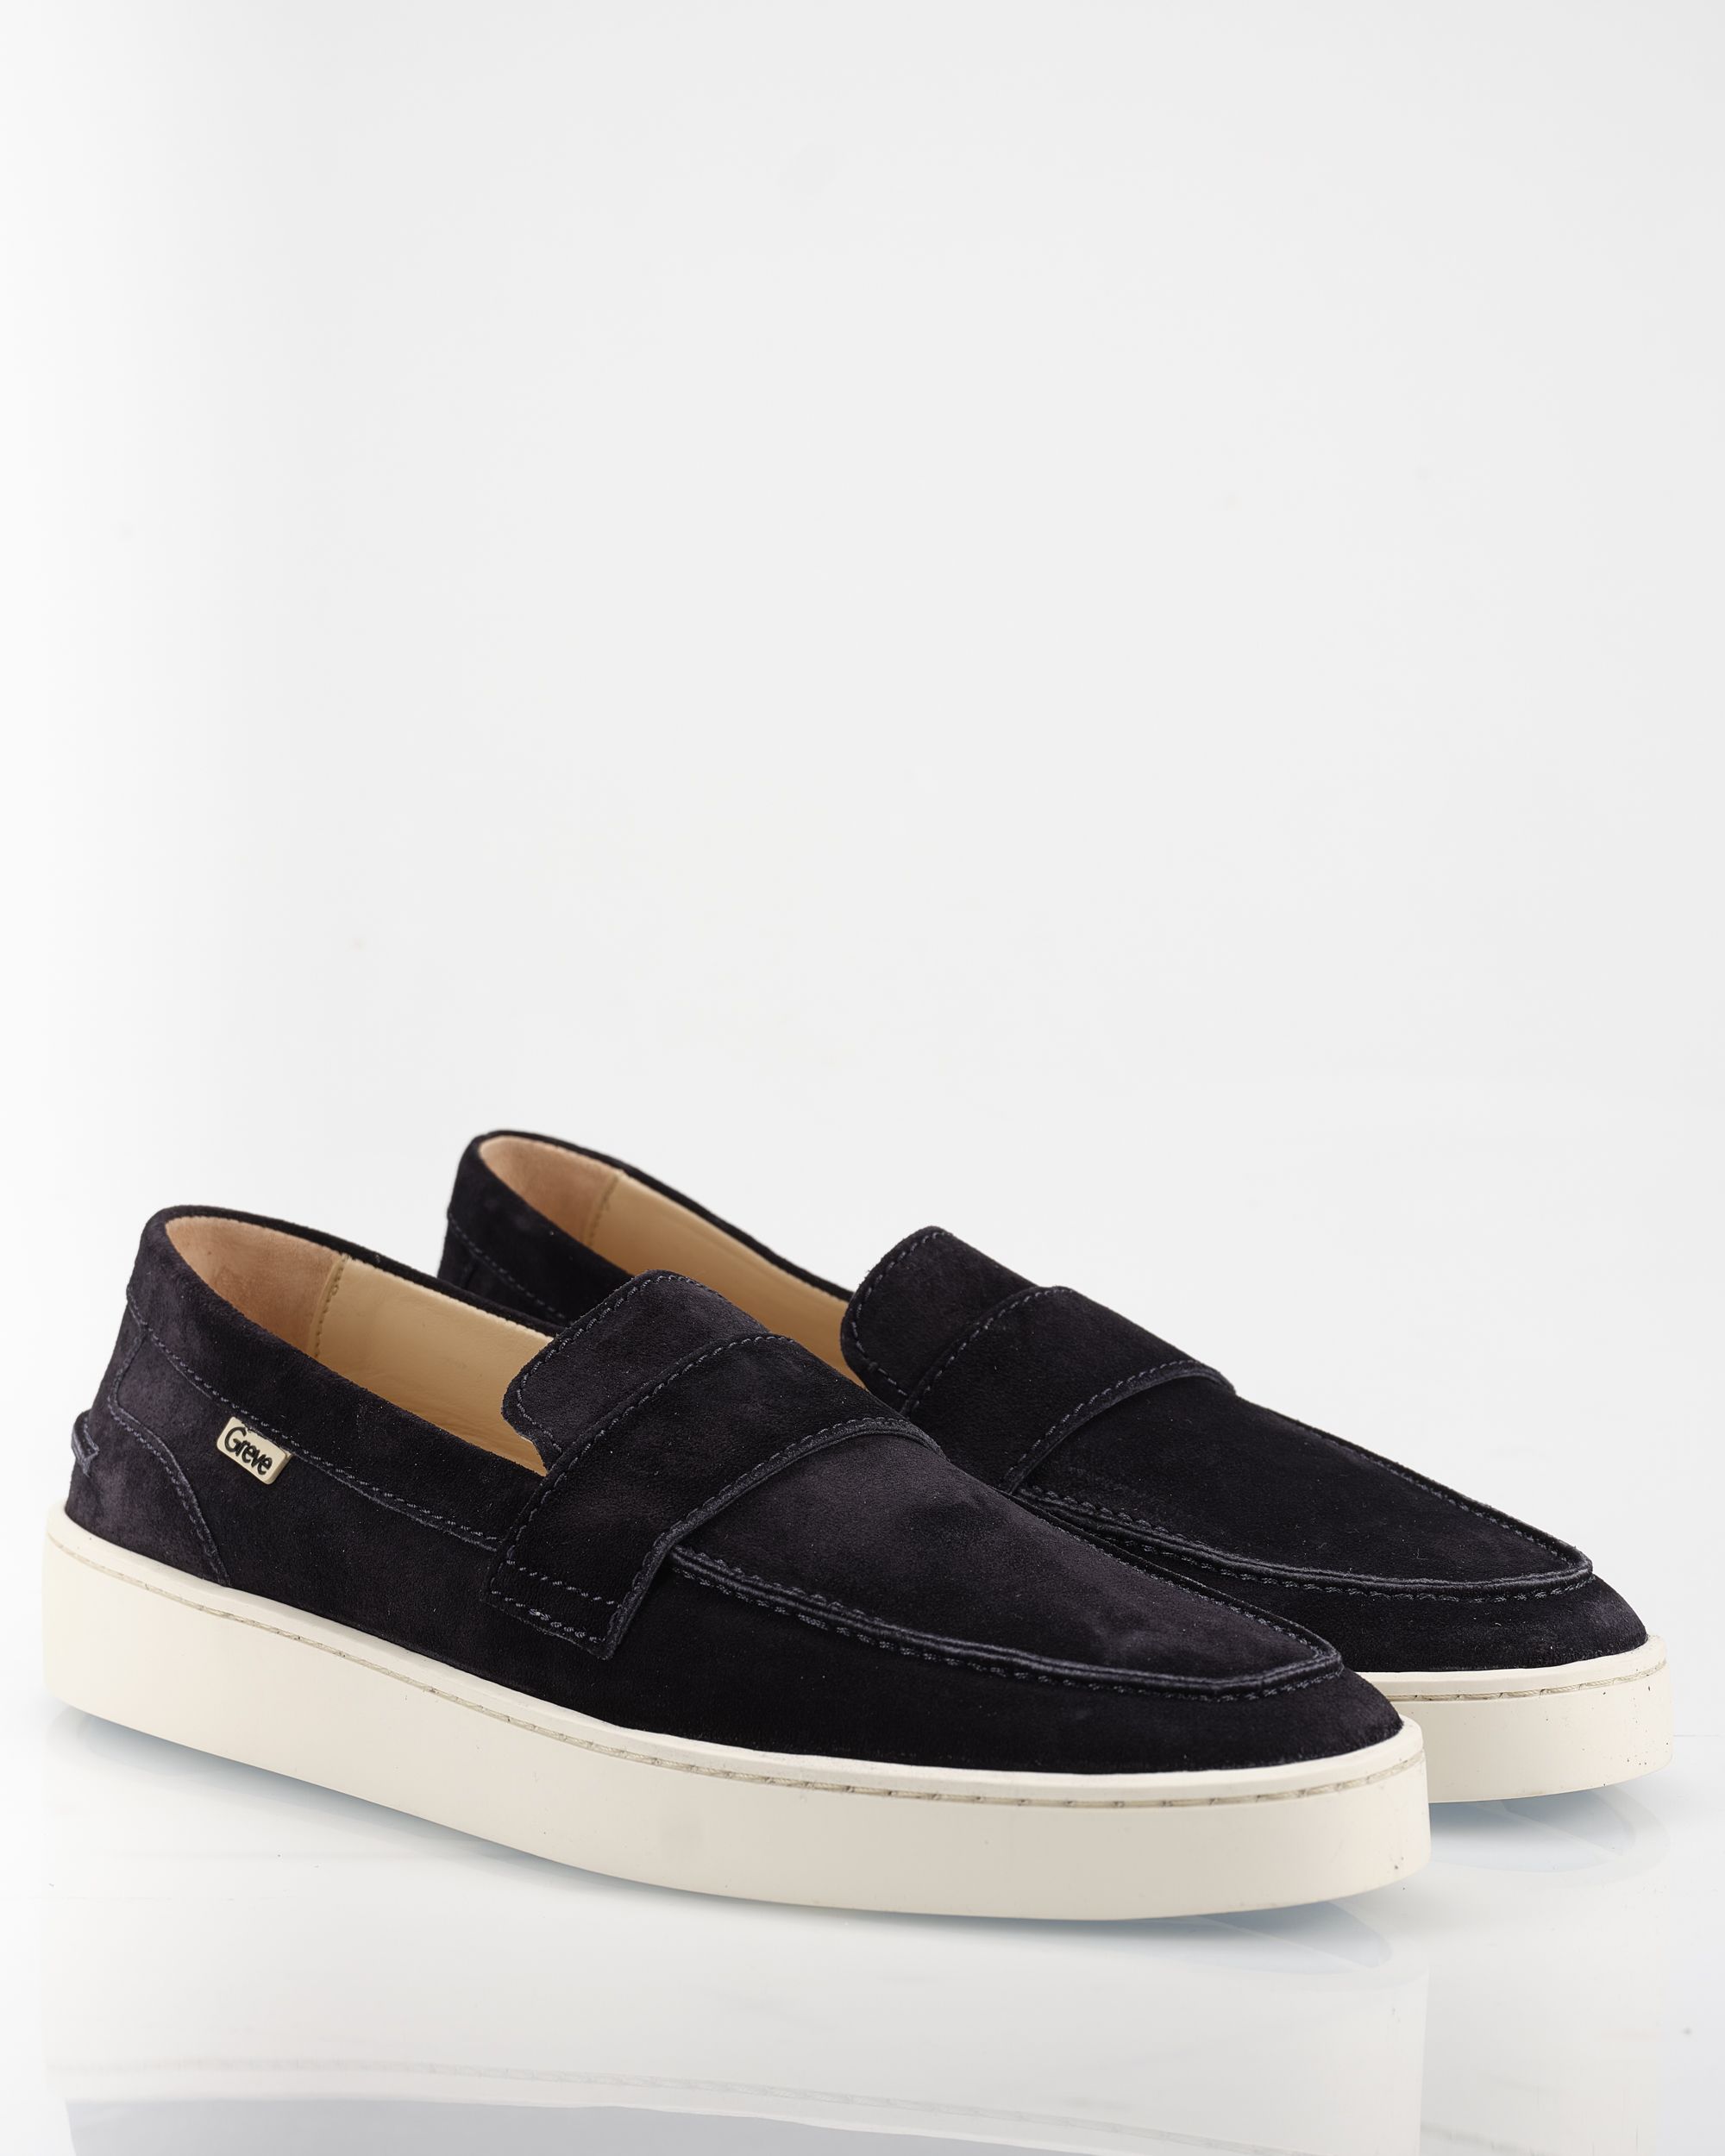 Greve Wave Loafers Donker blauw 092121-001-41